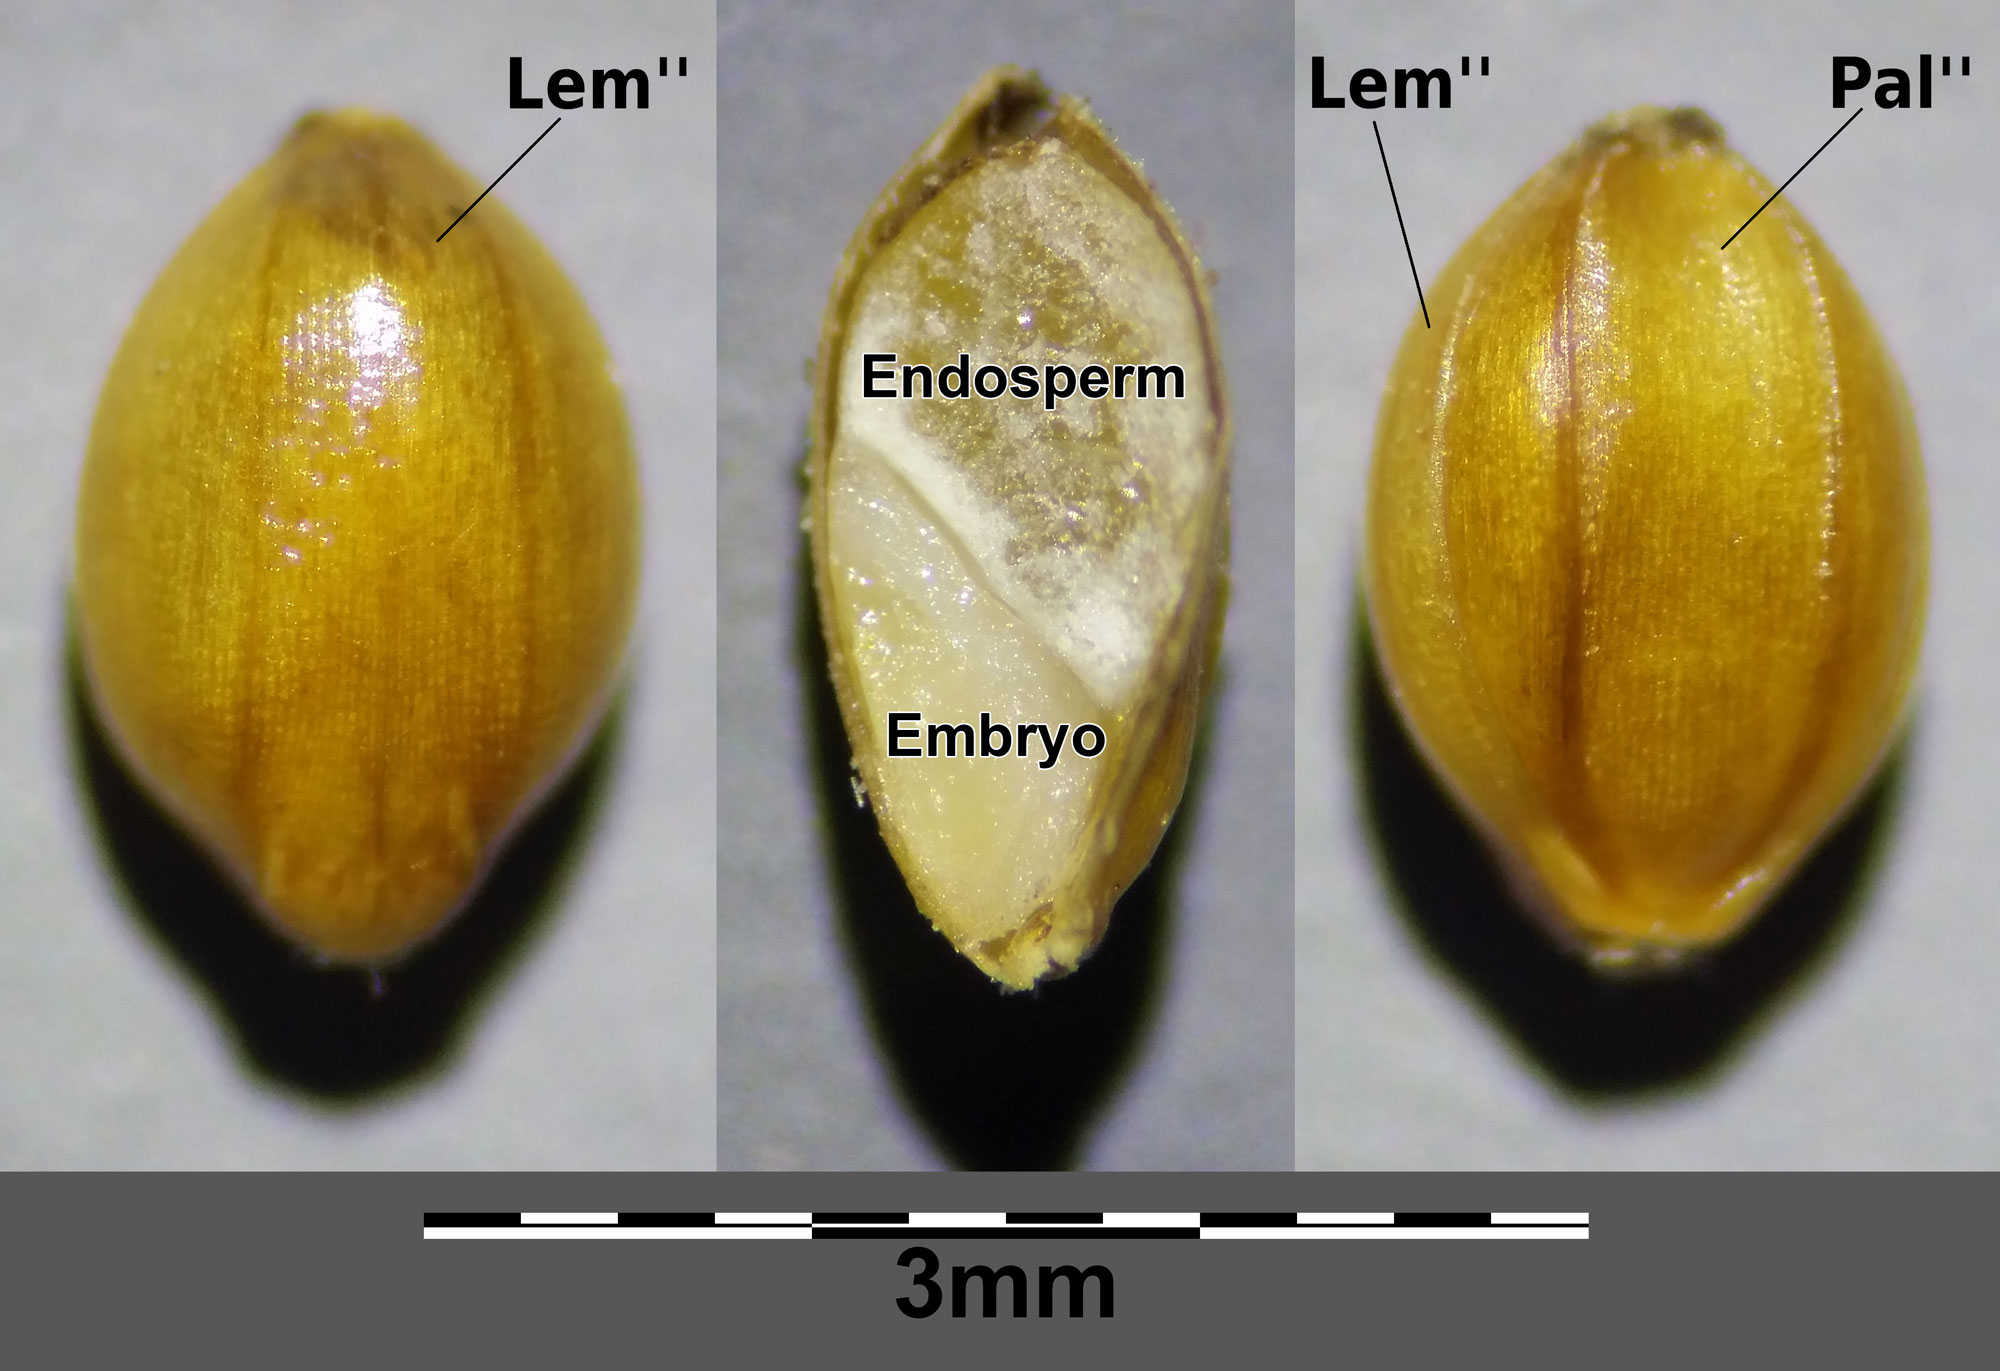 Three-panel image showing photographs of a foxtail millet caryopsis in three views. The left view shows the outside of the caryopsis with lemma labeled. The right view shows the outside of the caryopsis with lemma and palea labeled. The center view shows the caryopsis in long section with endosperm and embryo labeled.